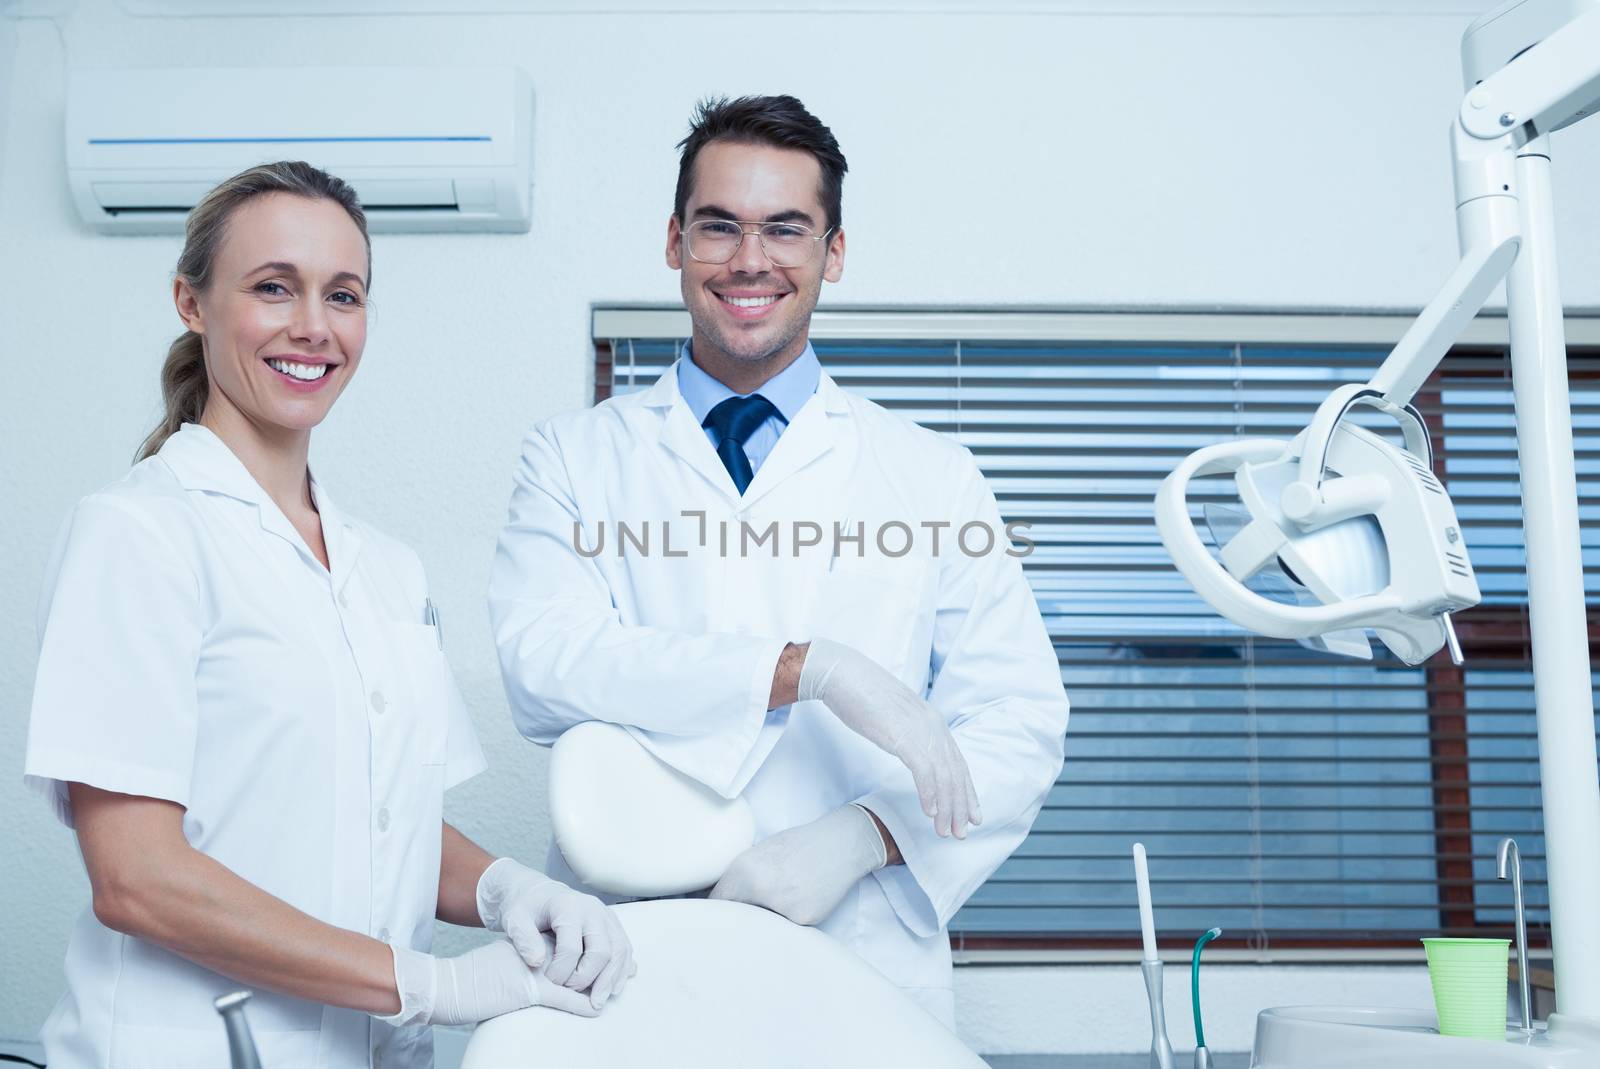 Portrait of smiling male and female dentists